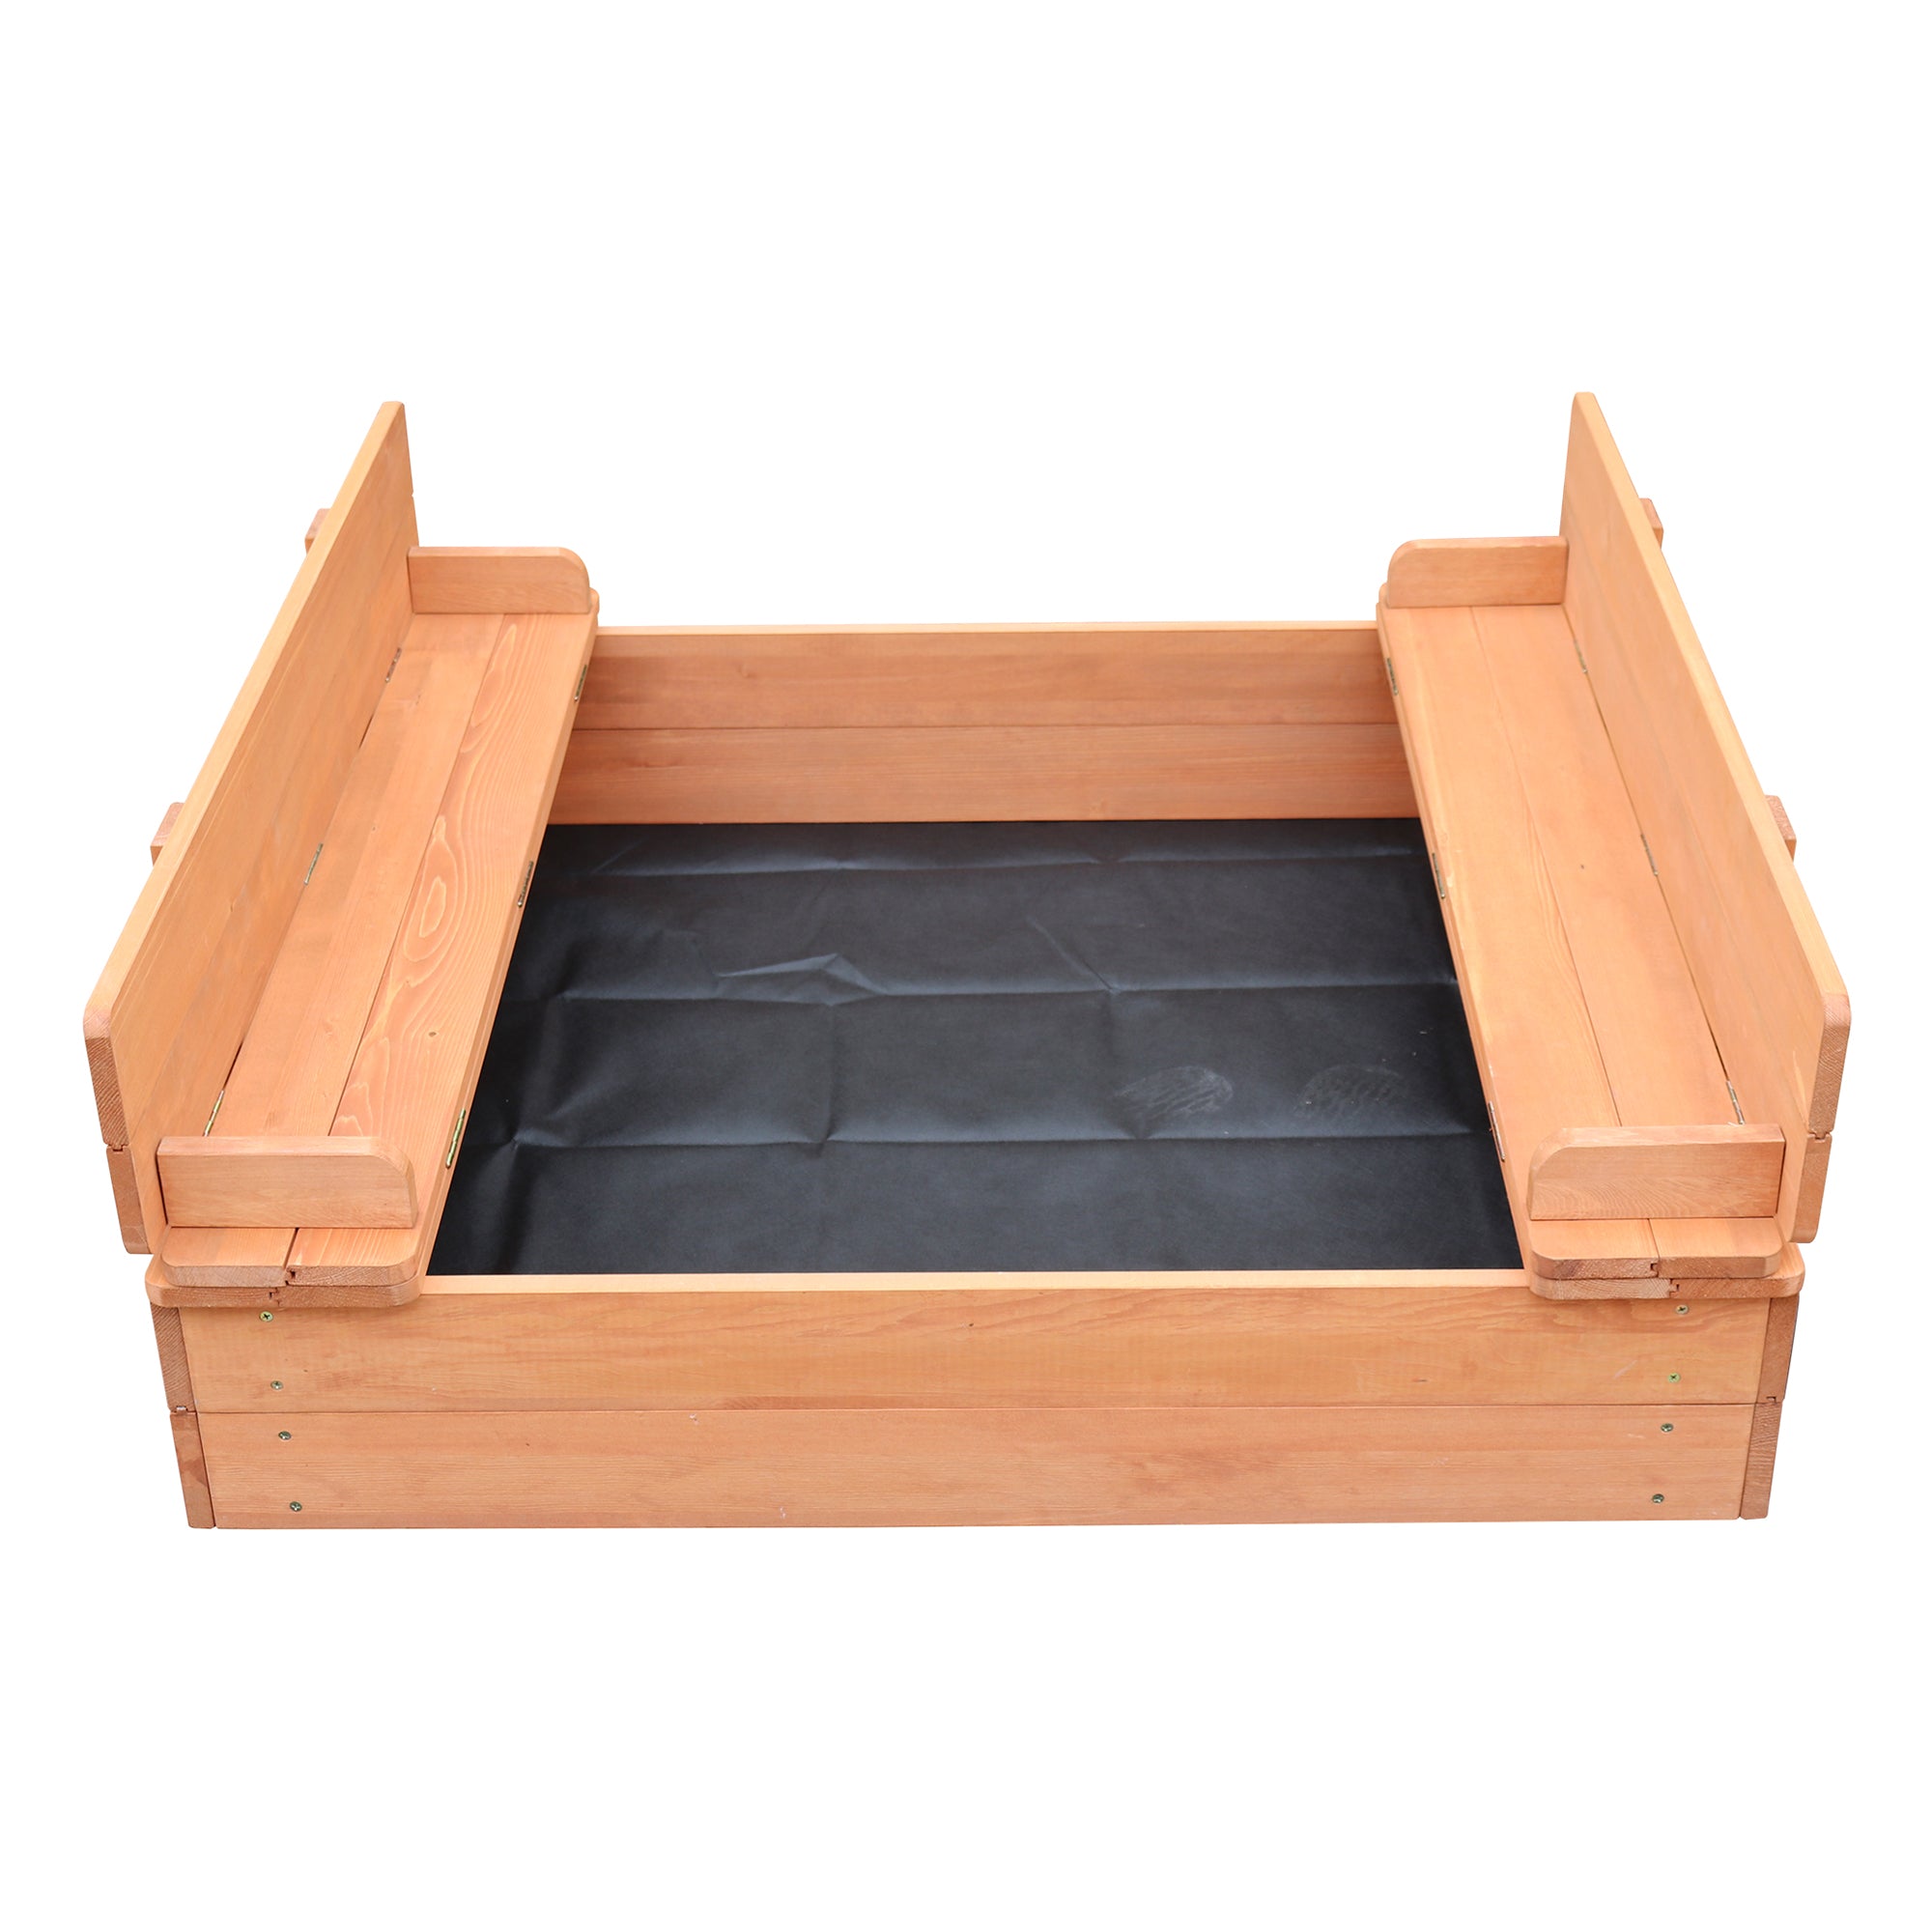 Wooden Sandpit with Cover